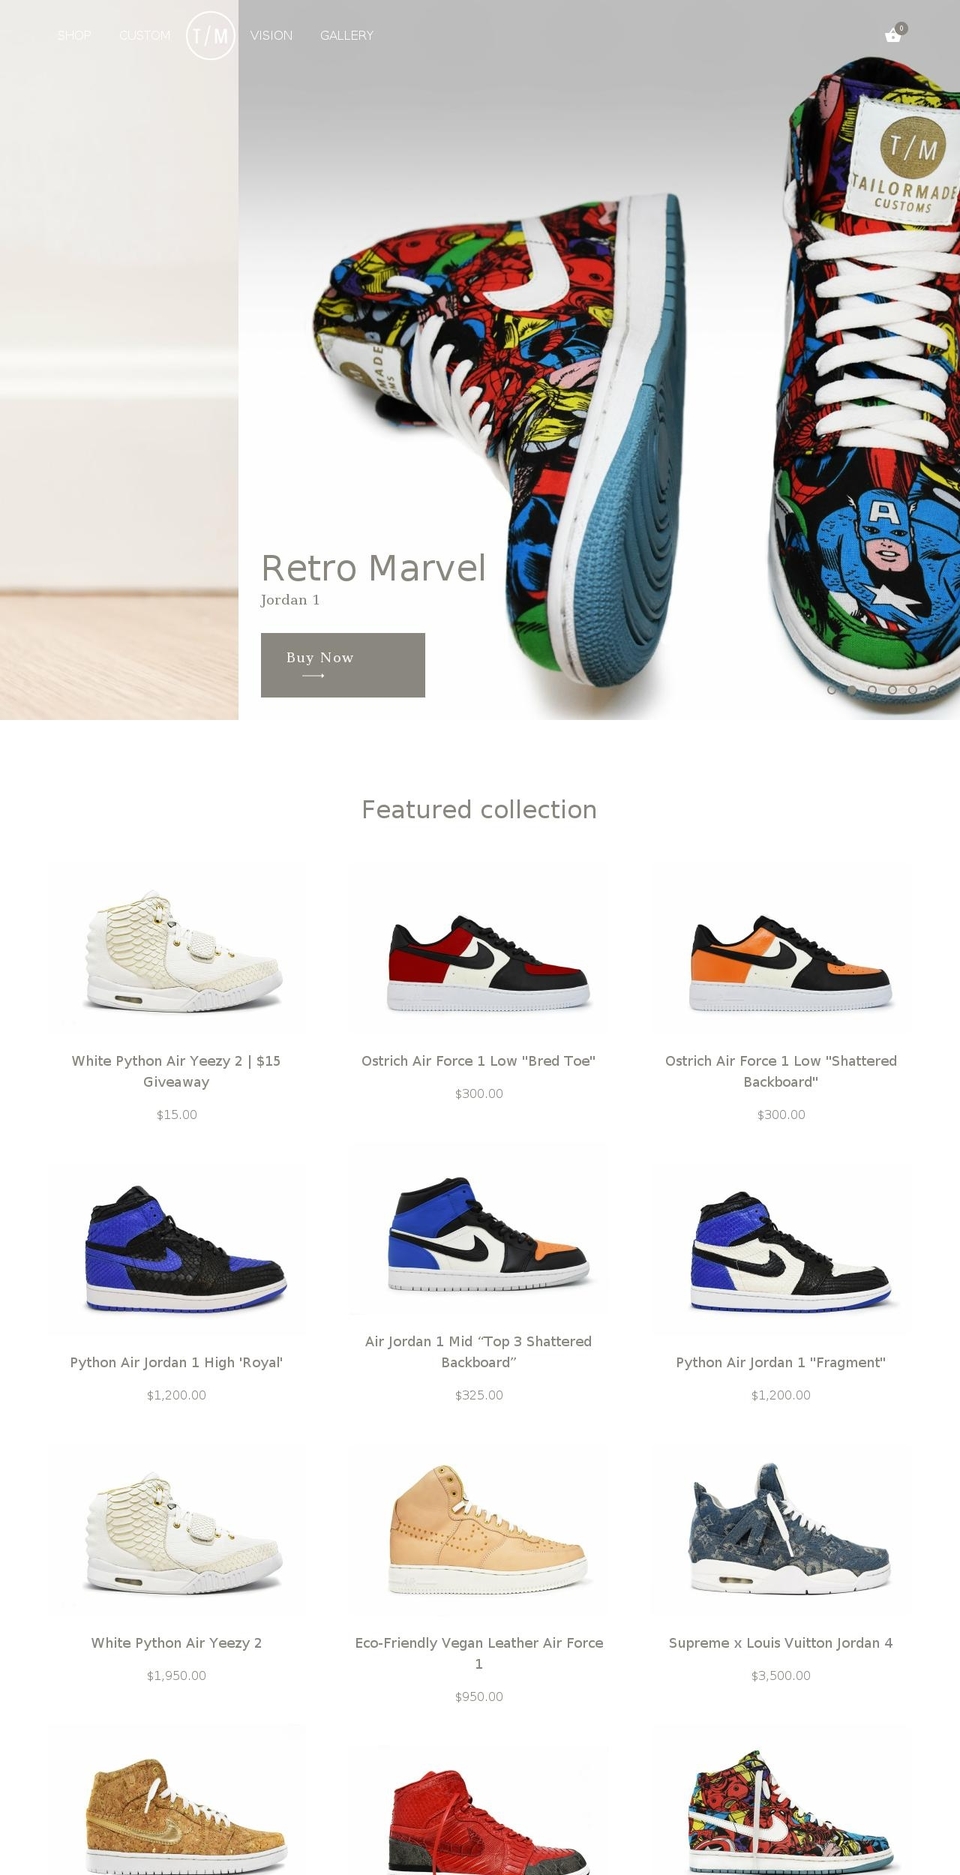 Tailor Shopify theme site example tailormadecustoms.com